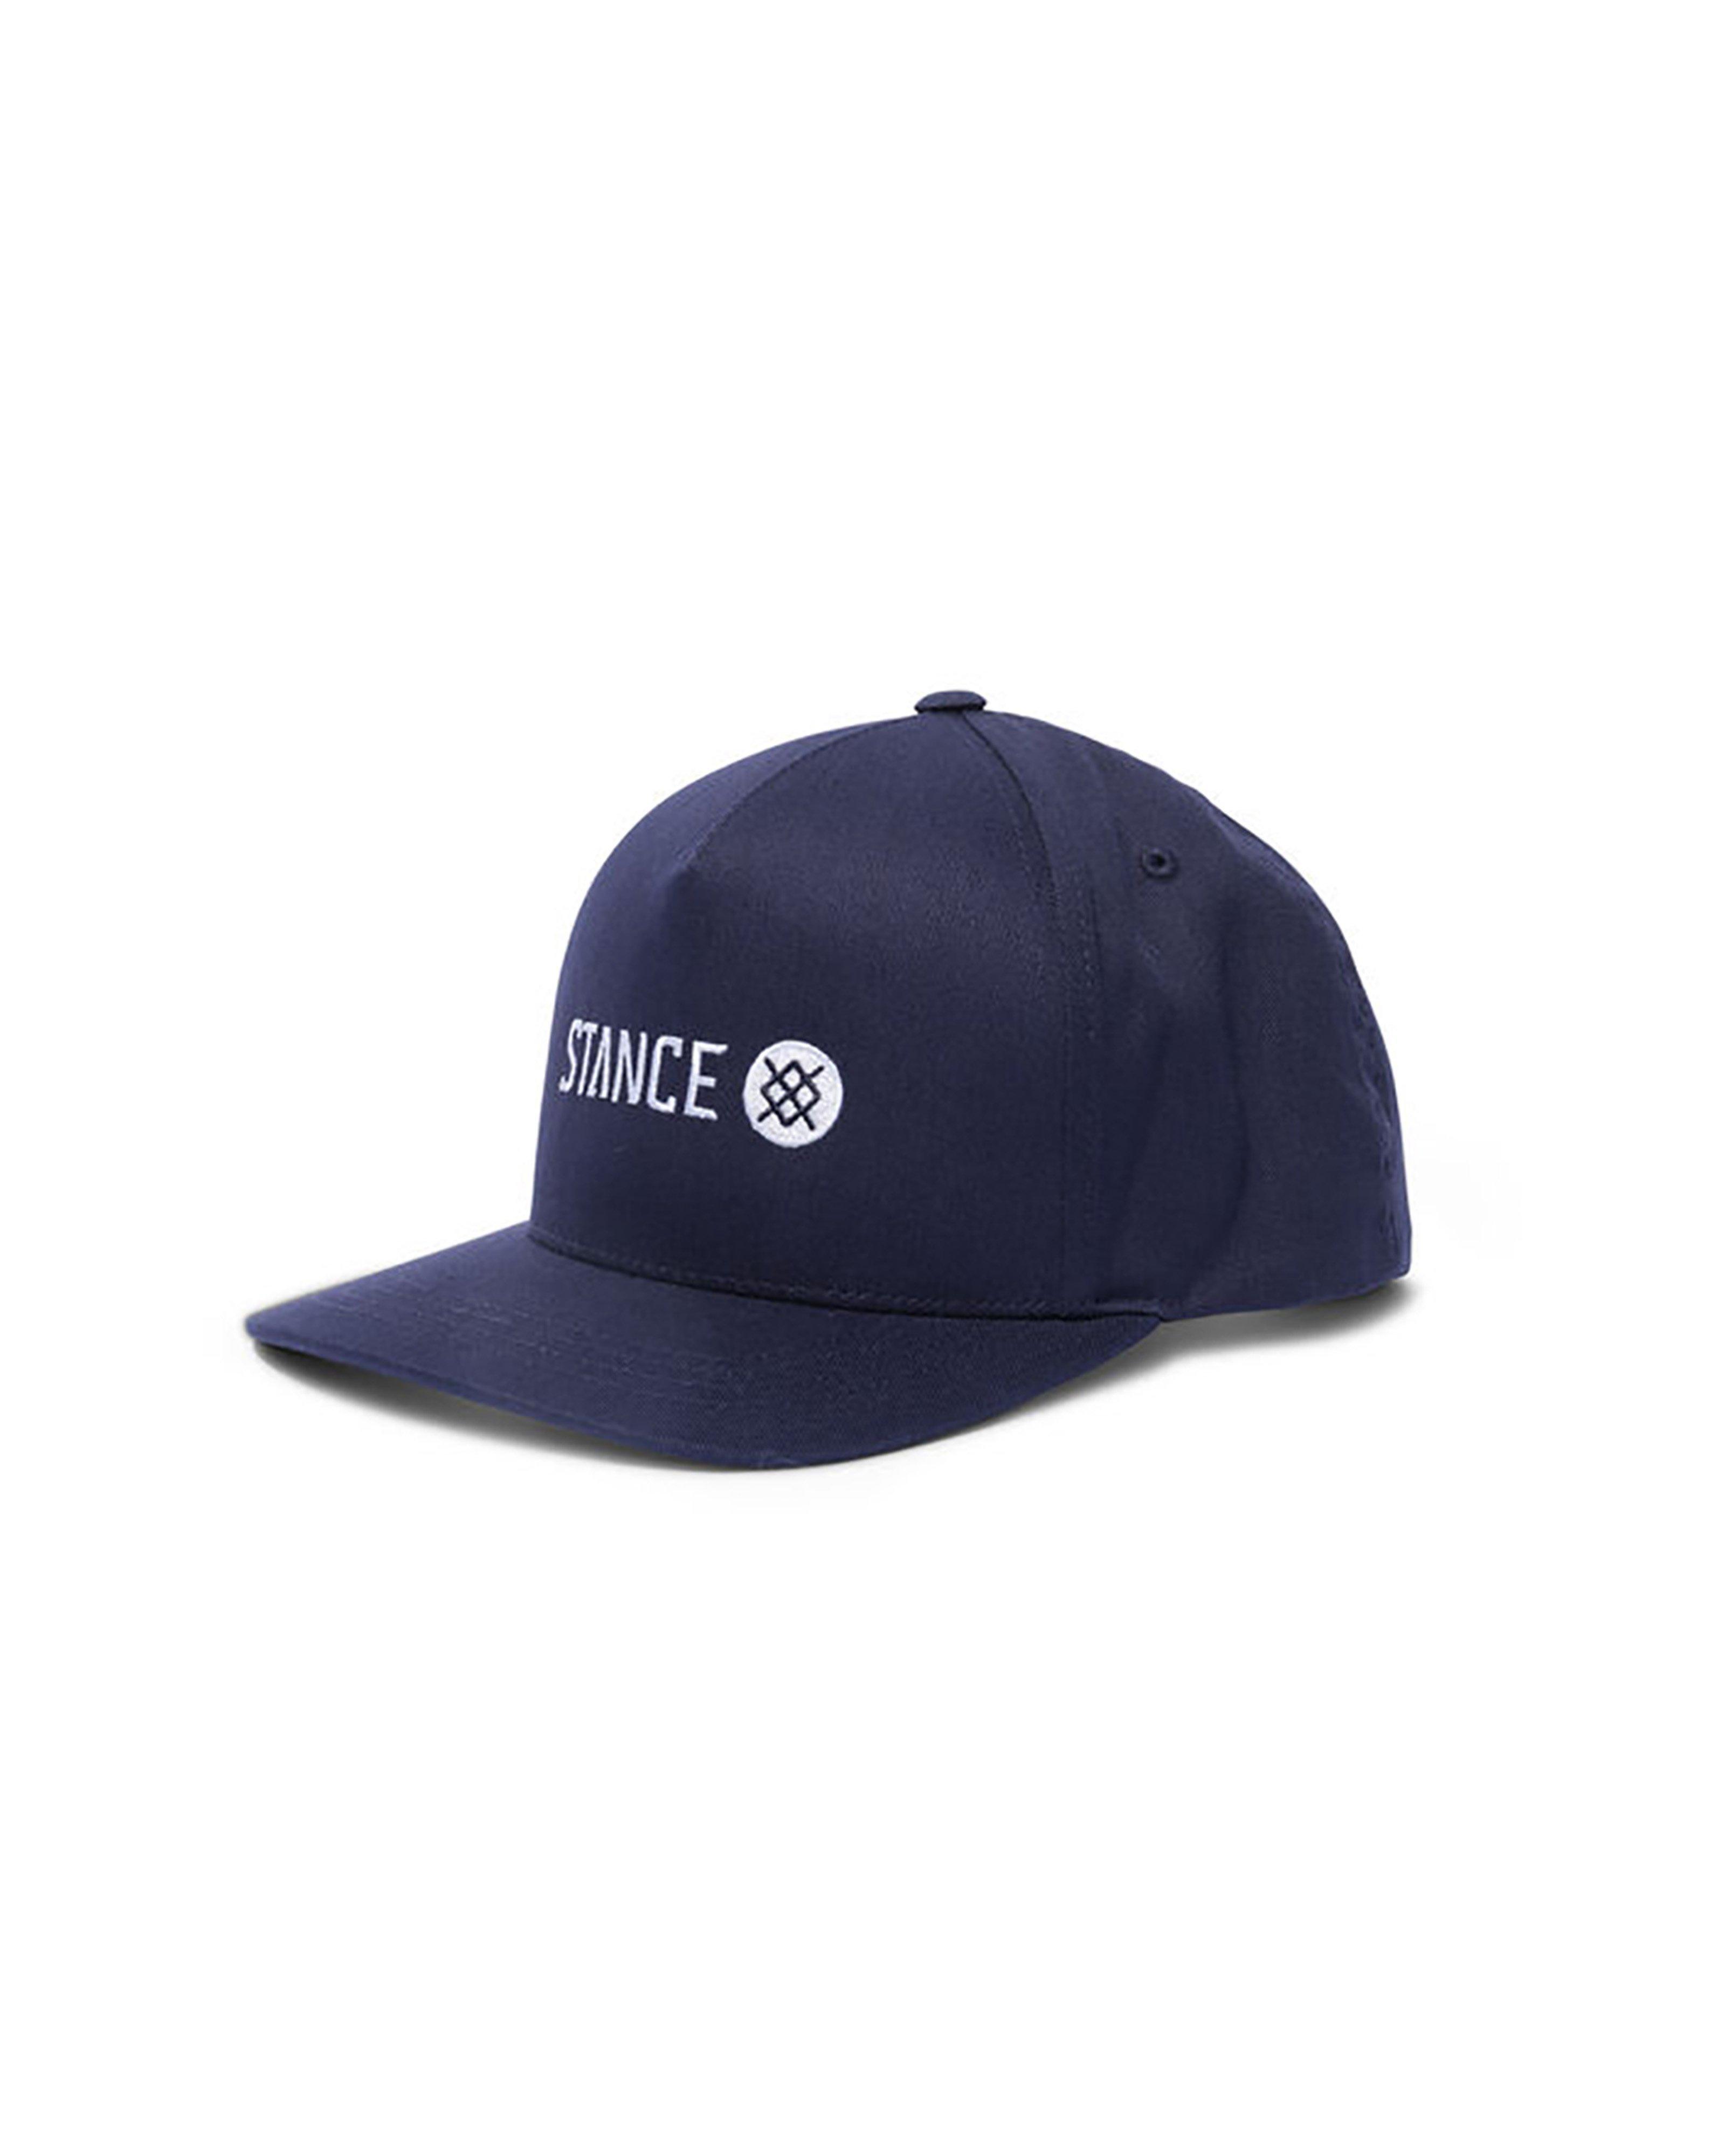 Stance Icon Snap Back Cap -  Navy